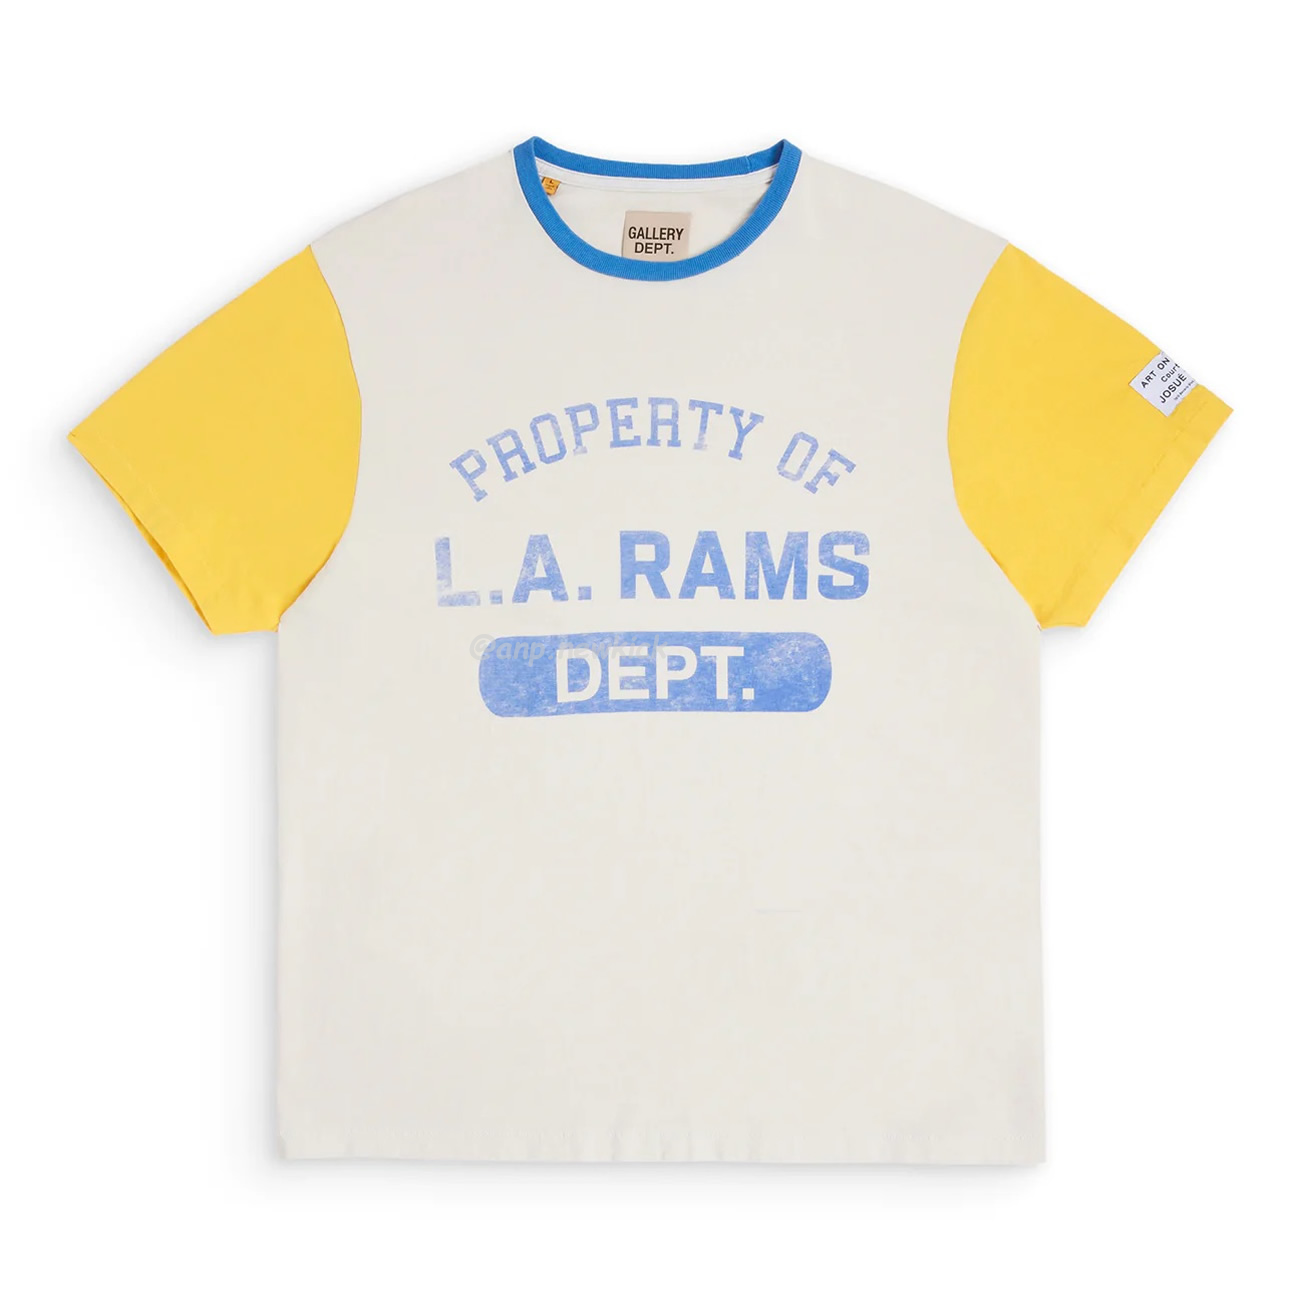 Gallery Dept X La Rams Color Block Tee Rams Co Branded Old Print Contrast Short Sleeve T Shirt (4) - newkick.org